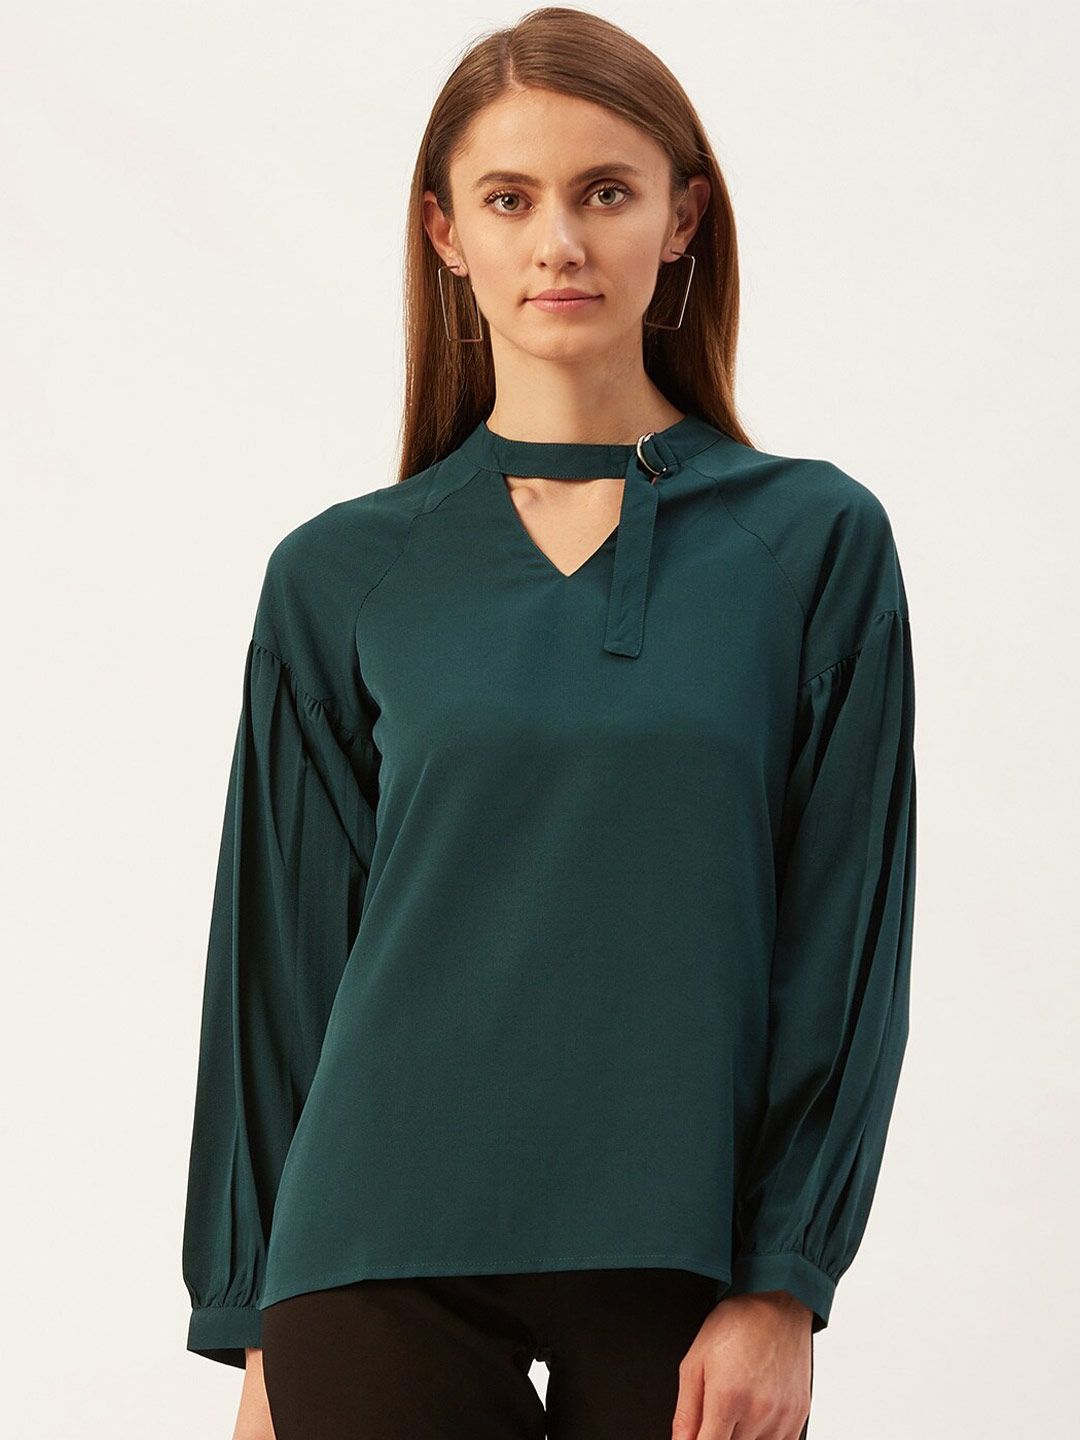 Magnetic Designs Women Green Keyhole Neck Crepe Top Price in India